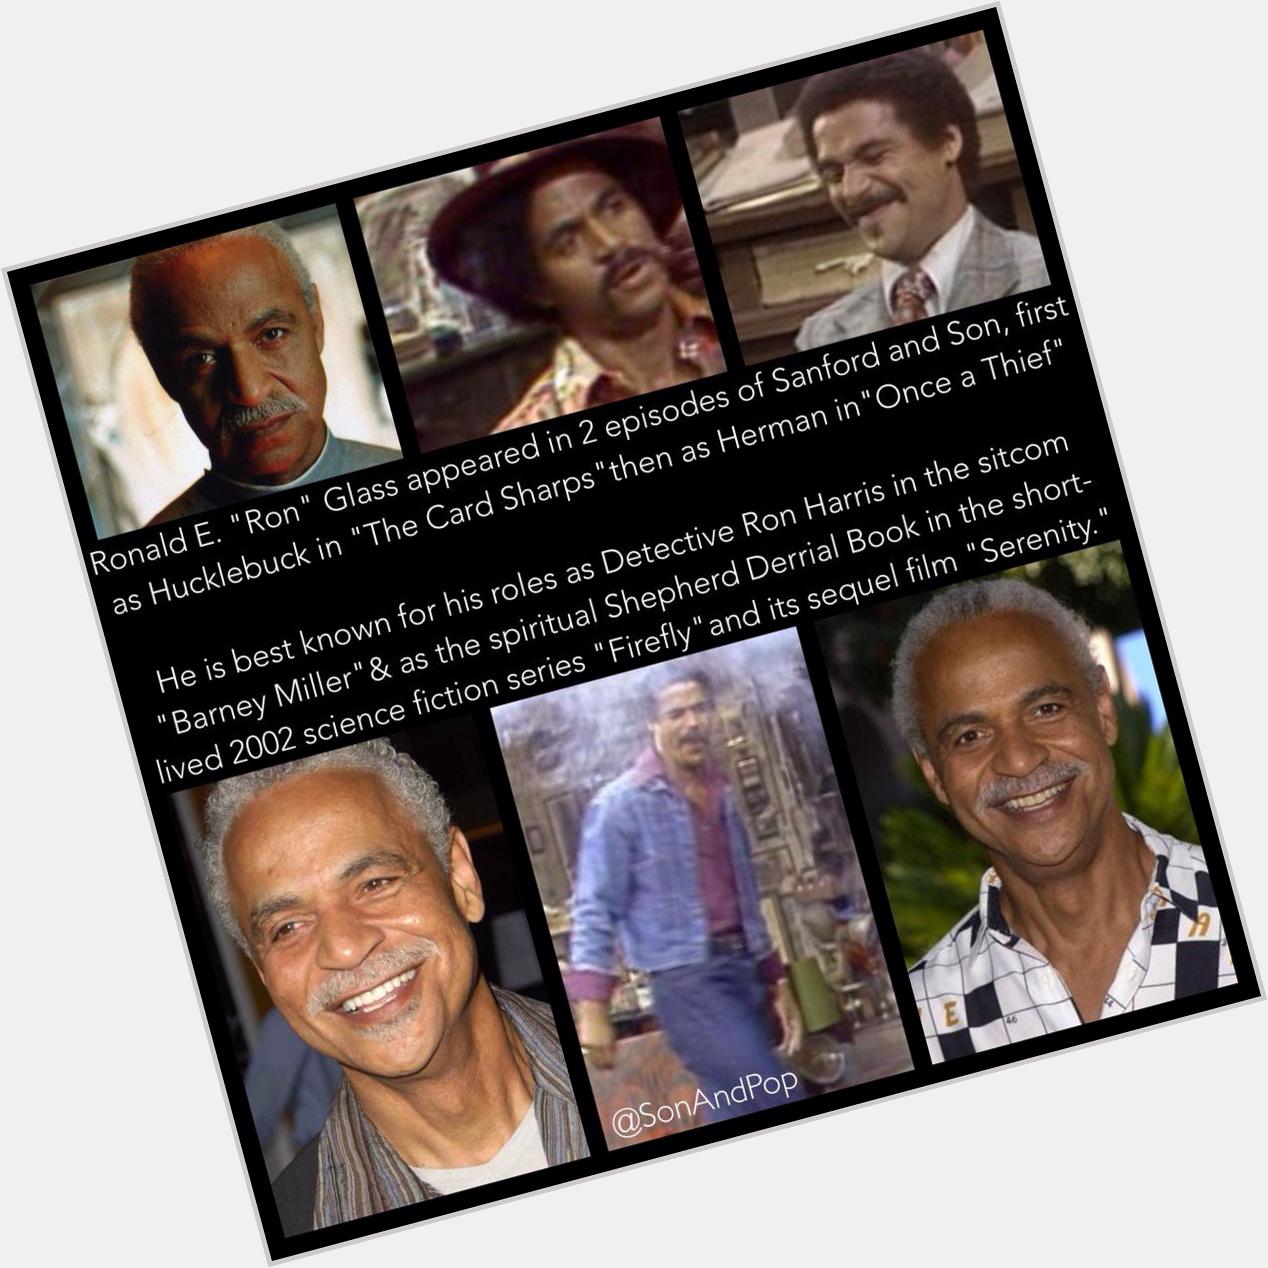 Happy Birthday to actor Ron Glass.
He turns 70. 